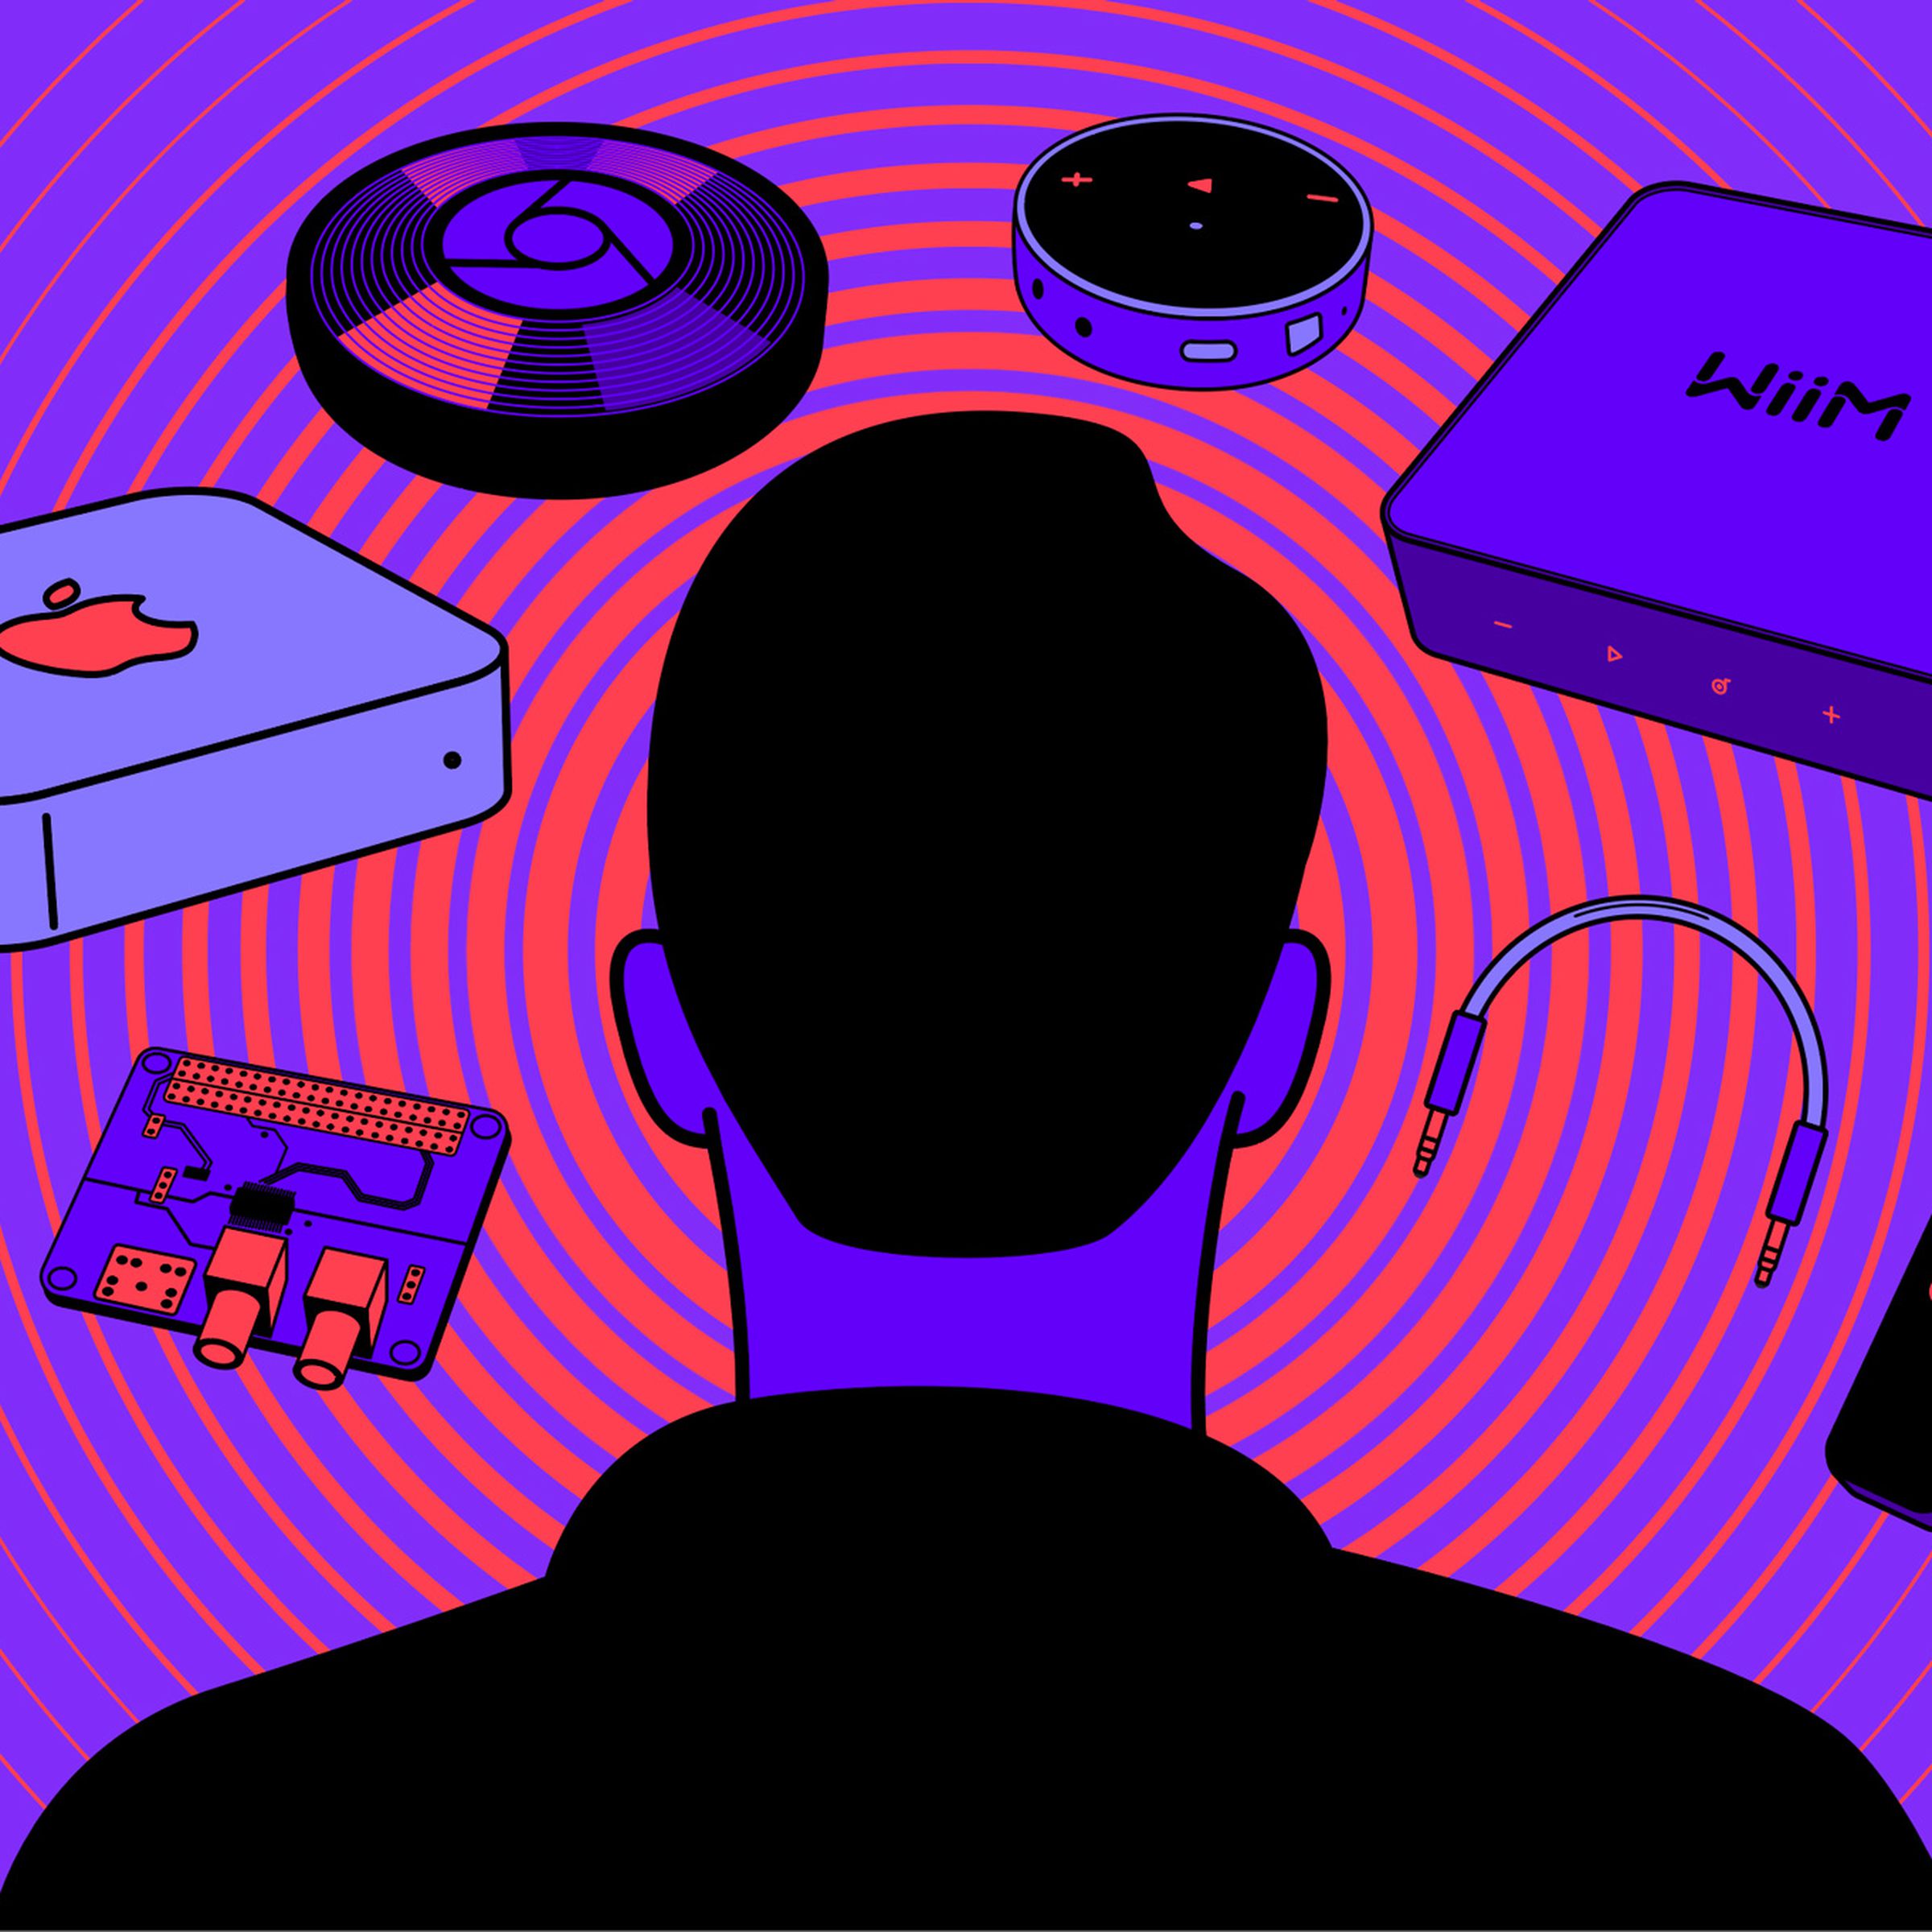 An illustration of many different streaming devices and a person’s head looking at them.